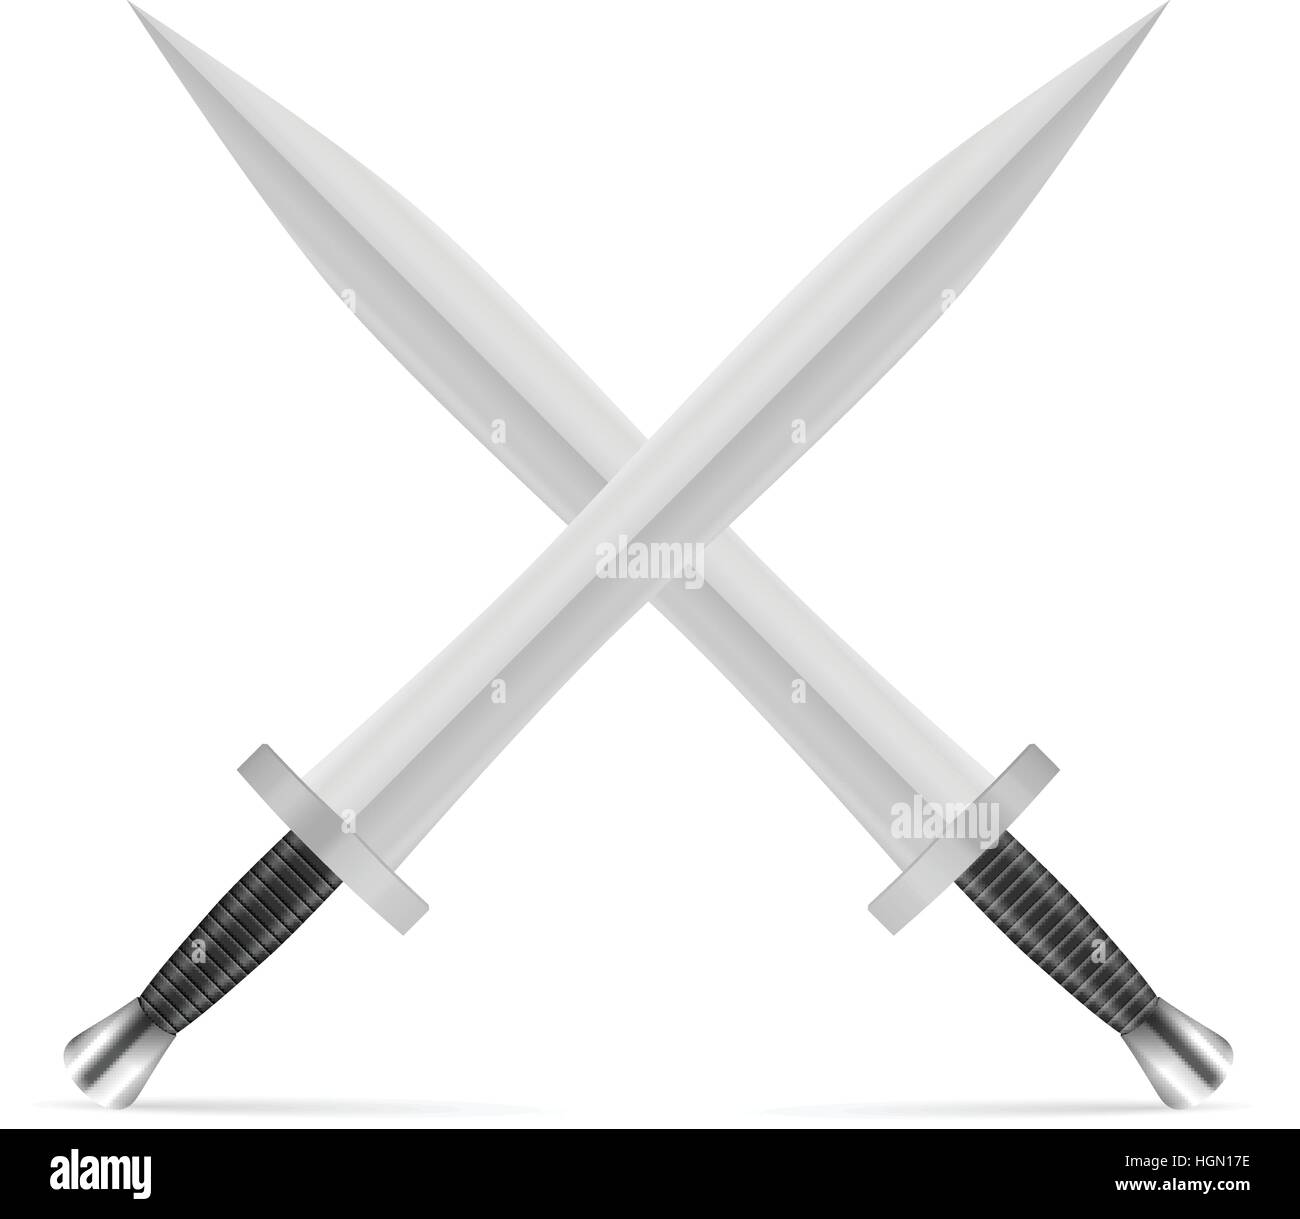 Swords on a white background. Vector illustration. Stock Vector